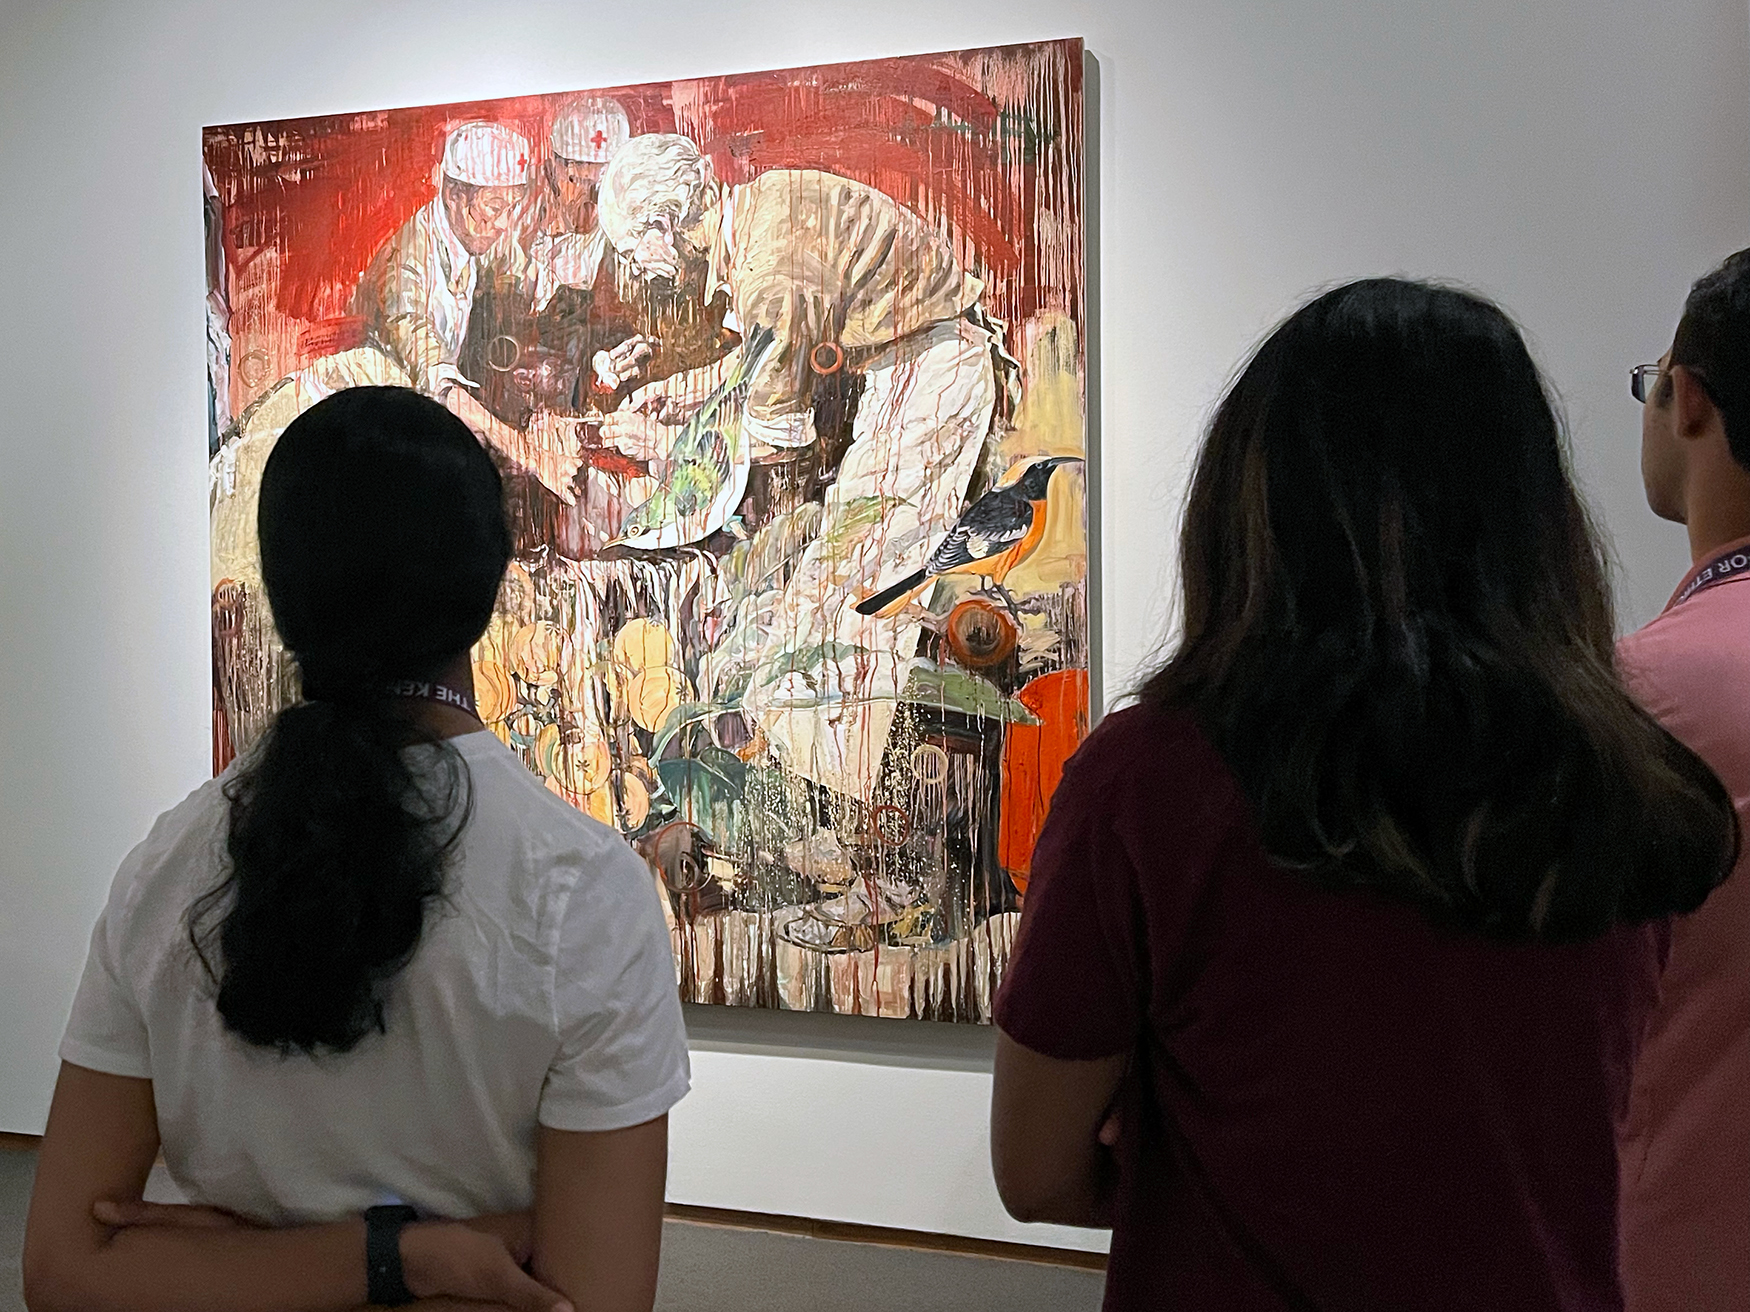 Students look at a colorful painting